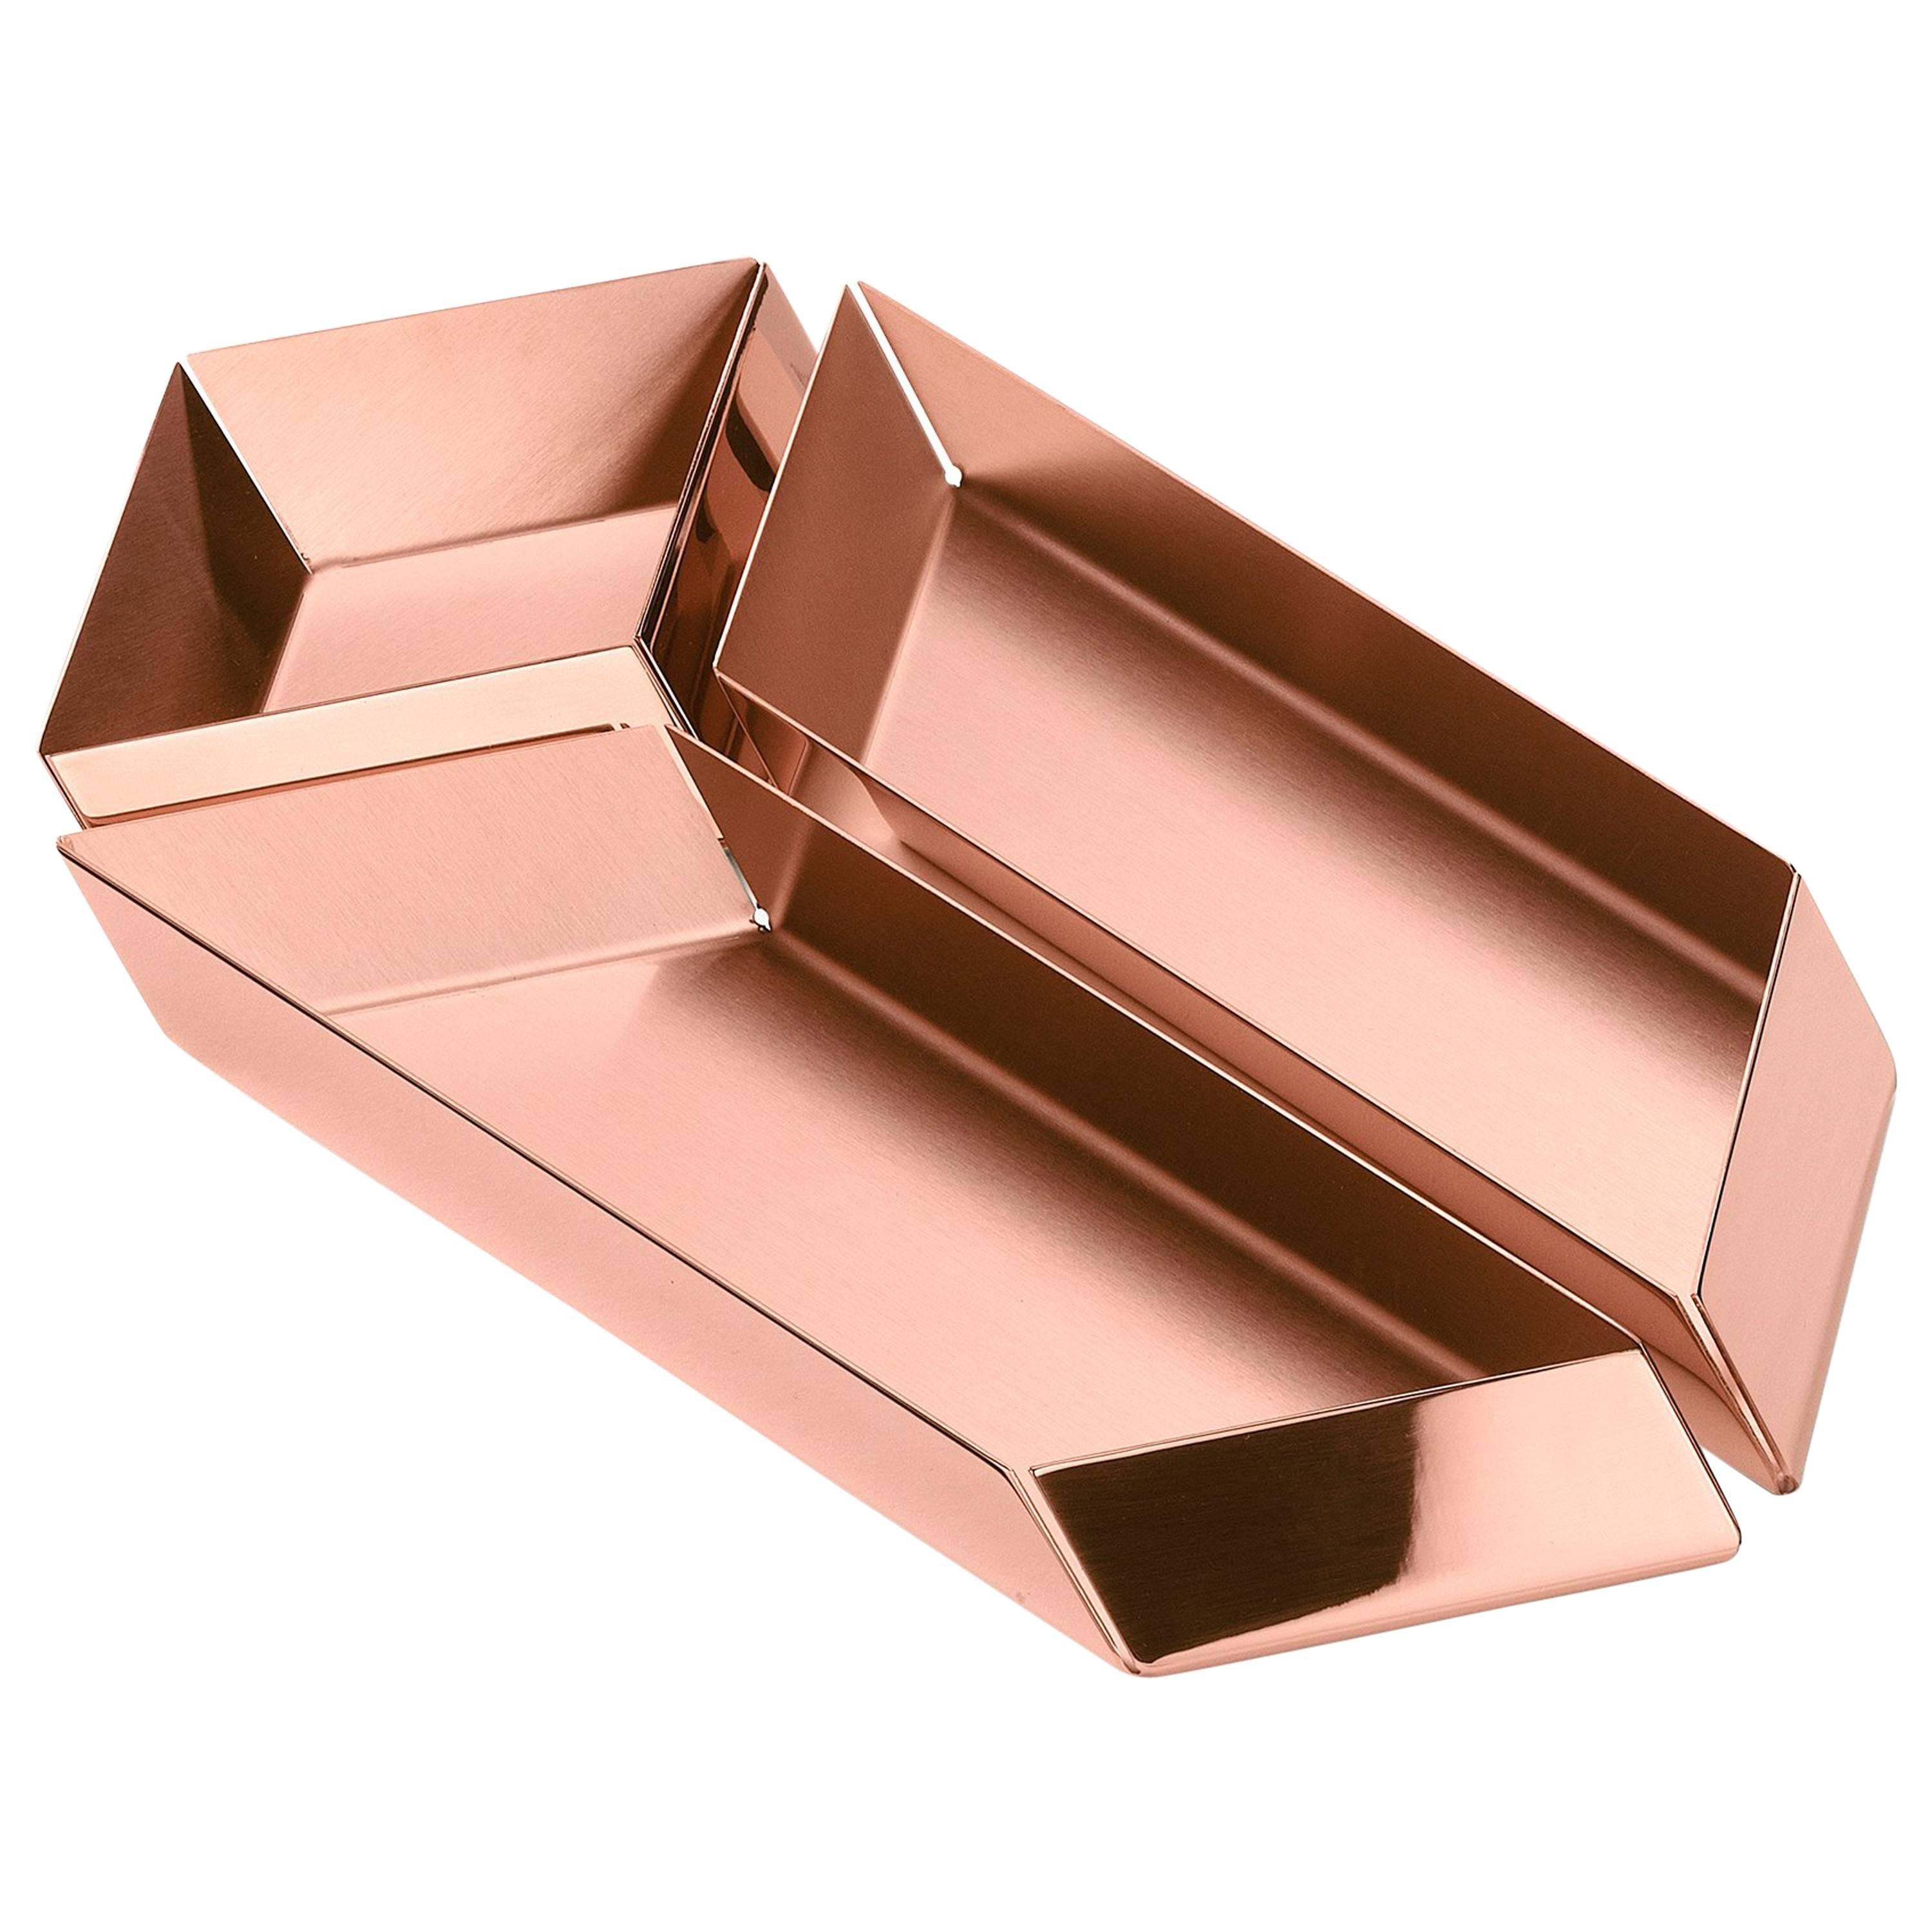 Ghidini 1961 Axonometry Set 3 Small Parallelepiped Tray Set in Rose Gold Finish For Sale